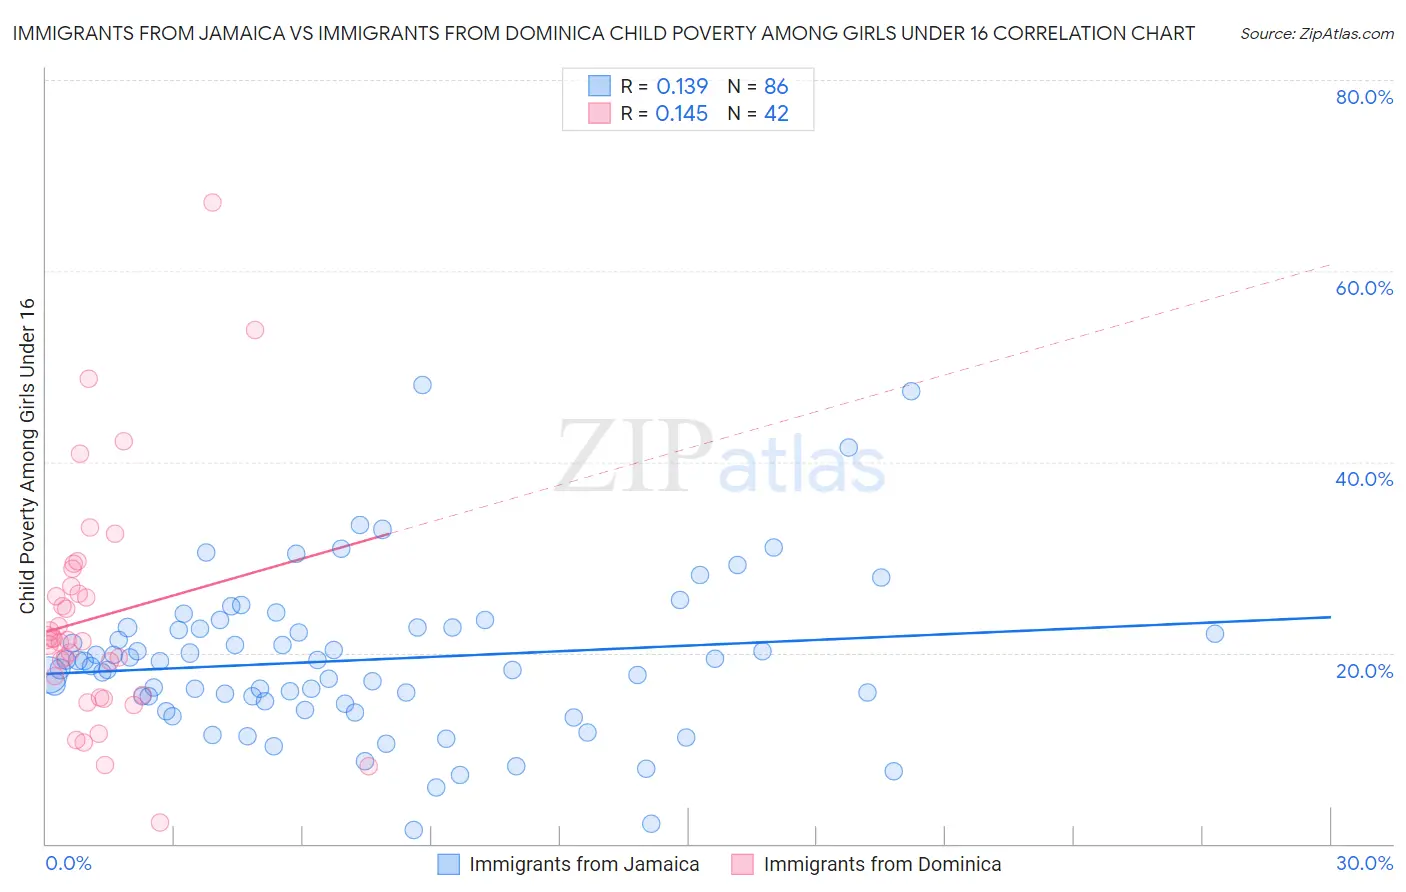 Immigrants from Jamaica vs Immigrants from Dominica Child Poverty Among Girls Under 16